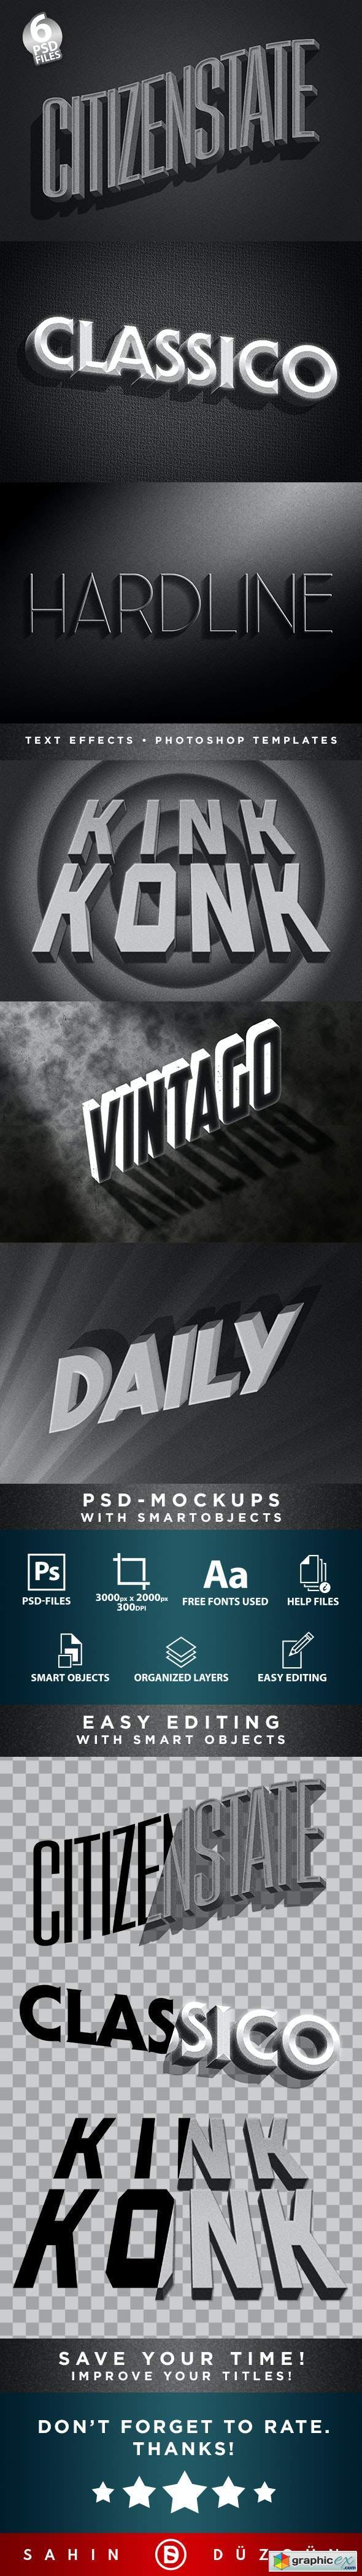 Classic Film Title Cards | 3D Text-Effects/Mockups | Template-Package